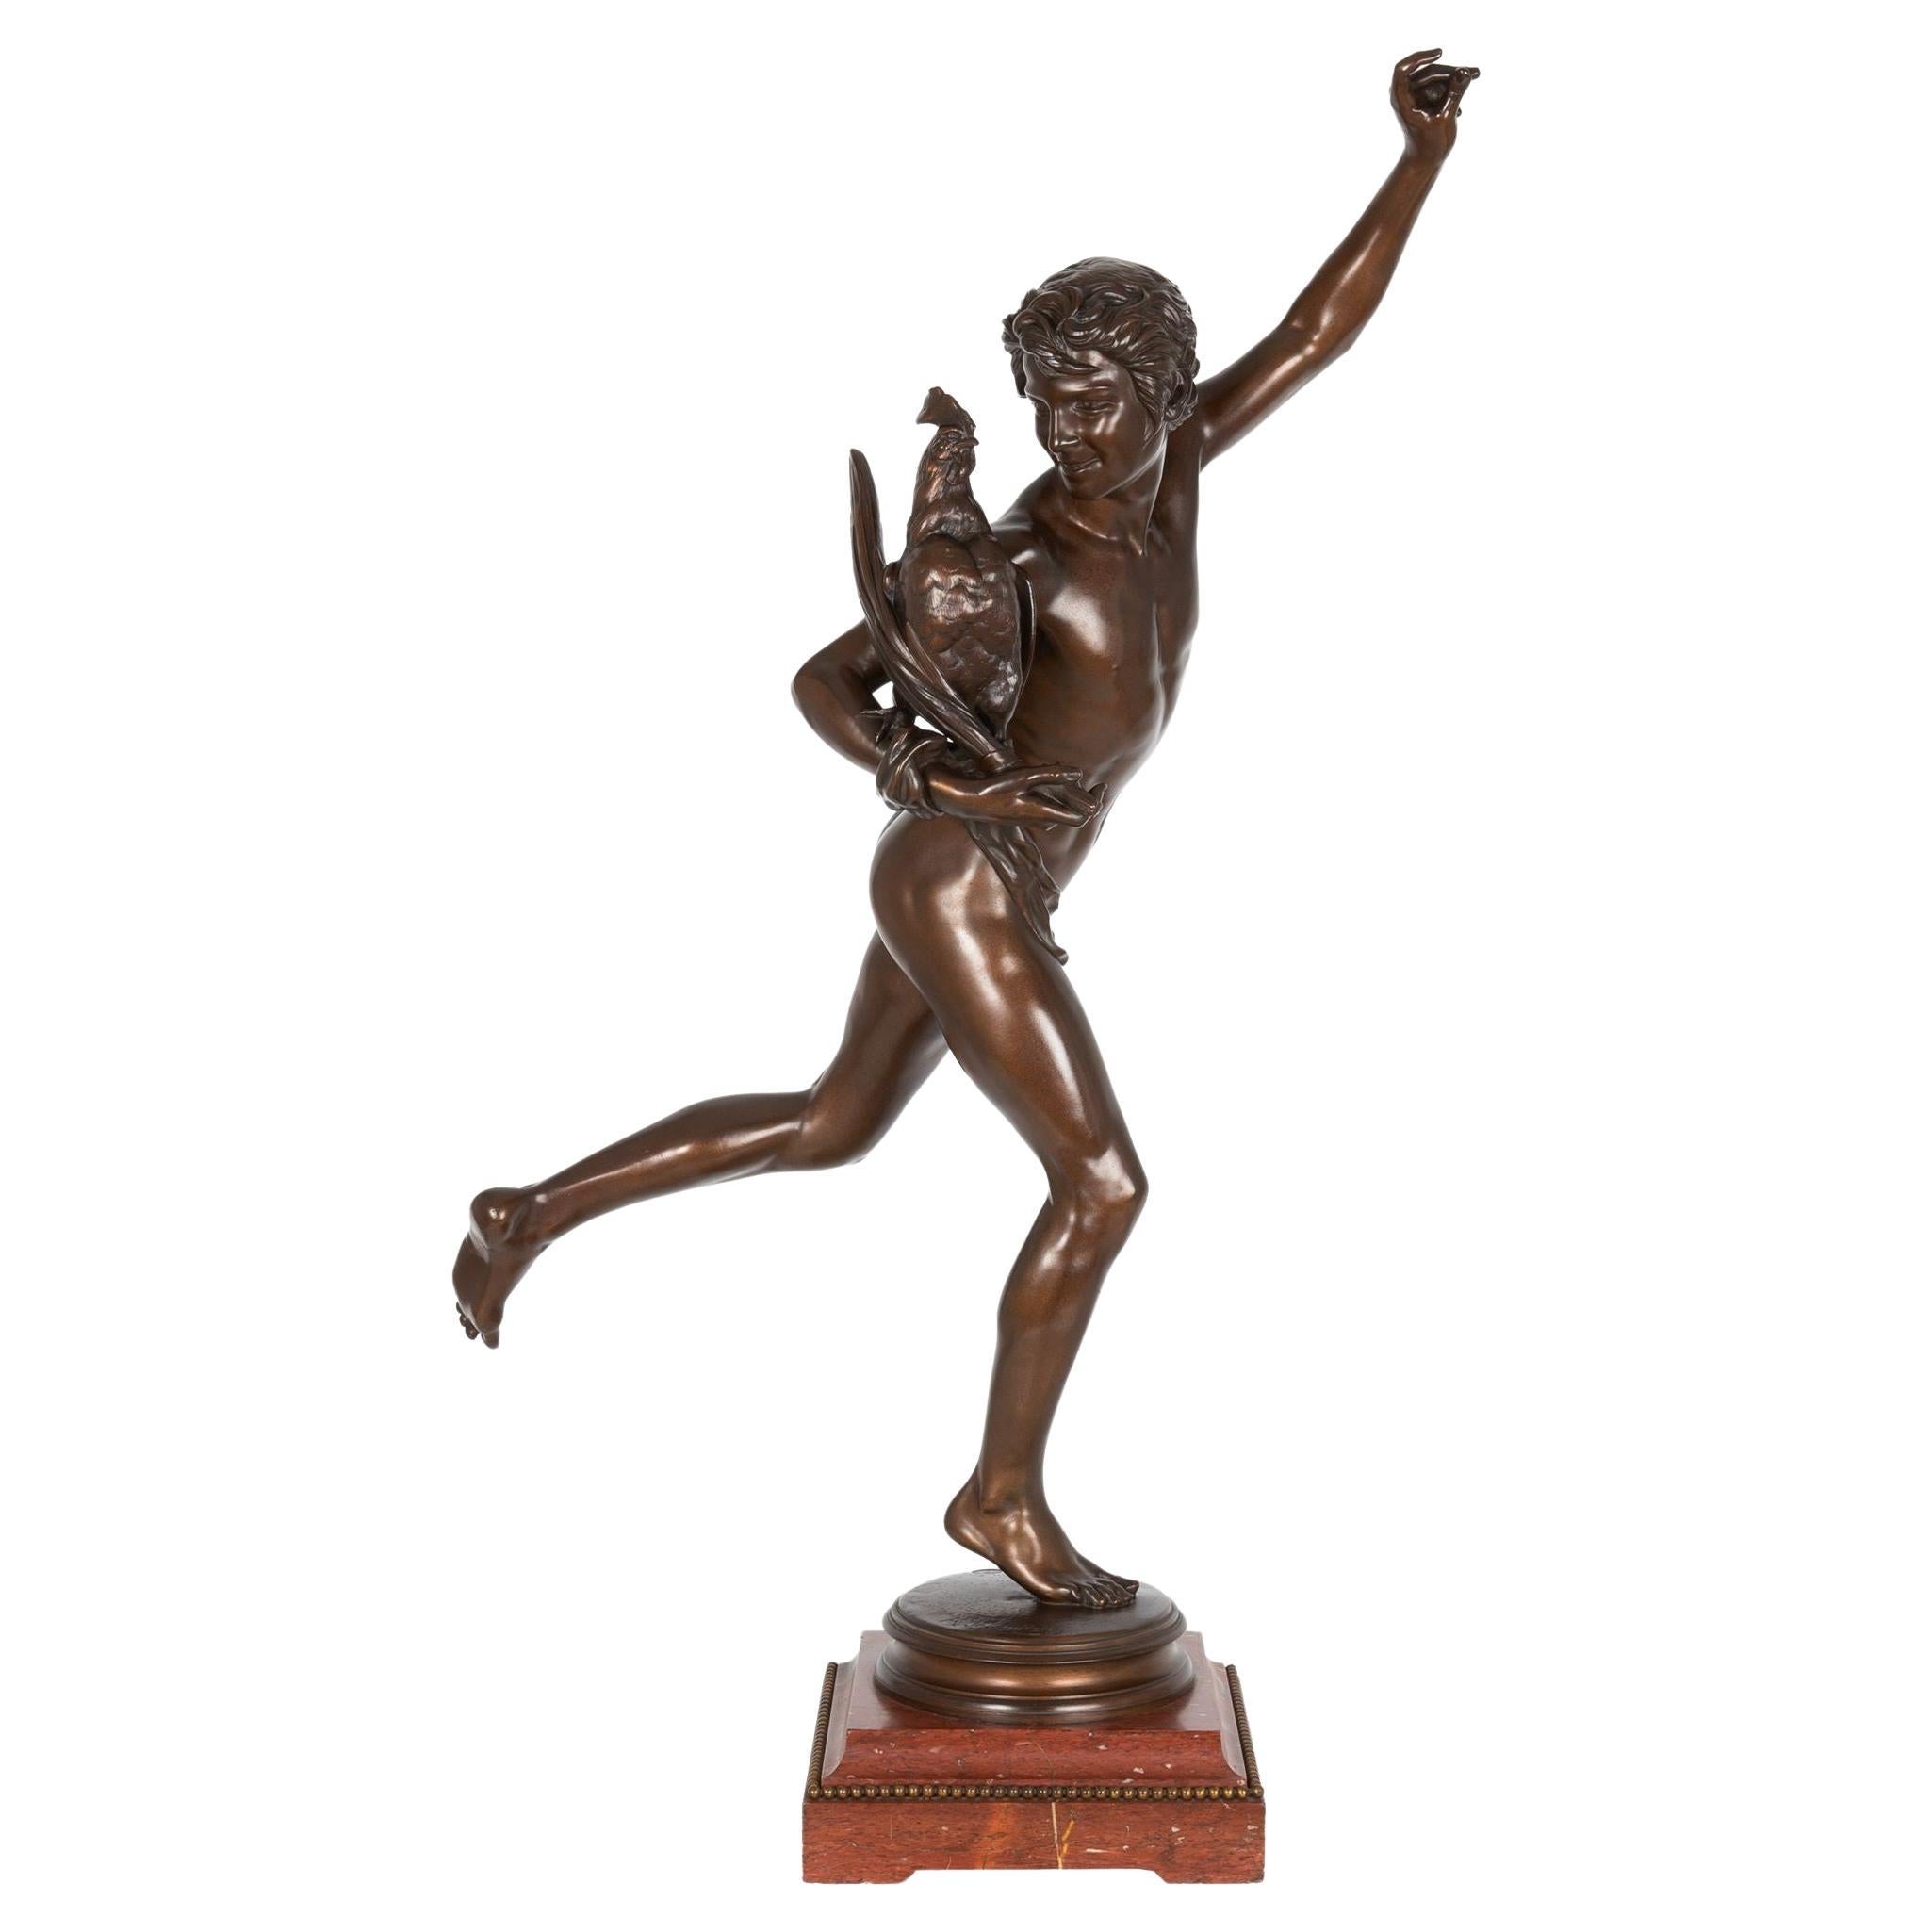 Large French Bronze Sculpture “Winner of Cockfight" by Falguiere & Thiebaut